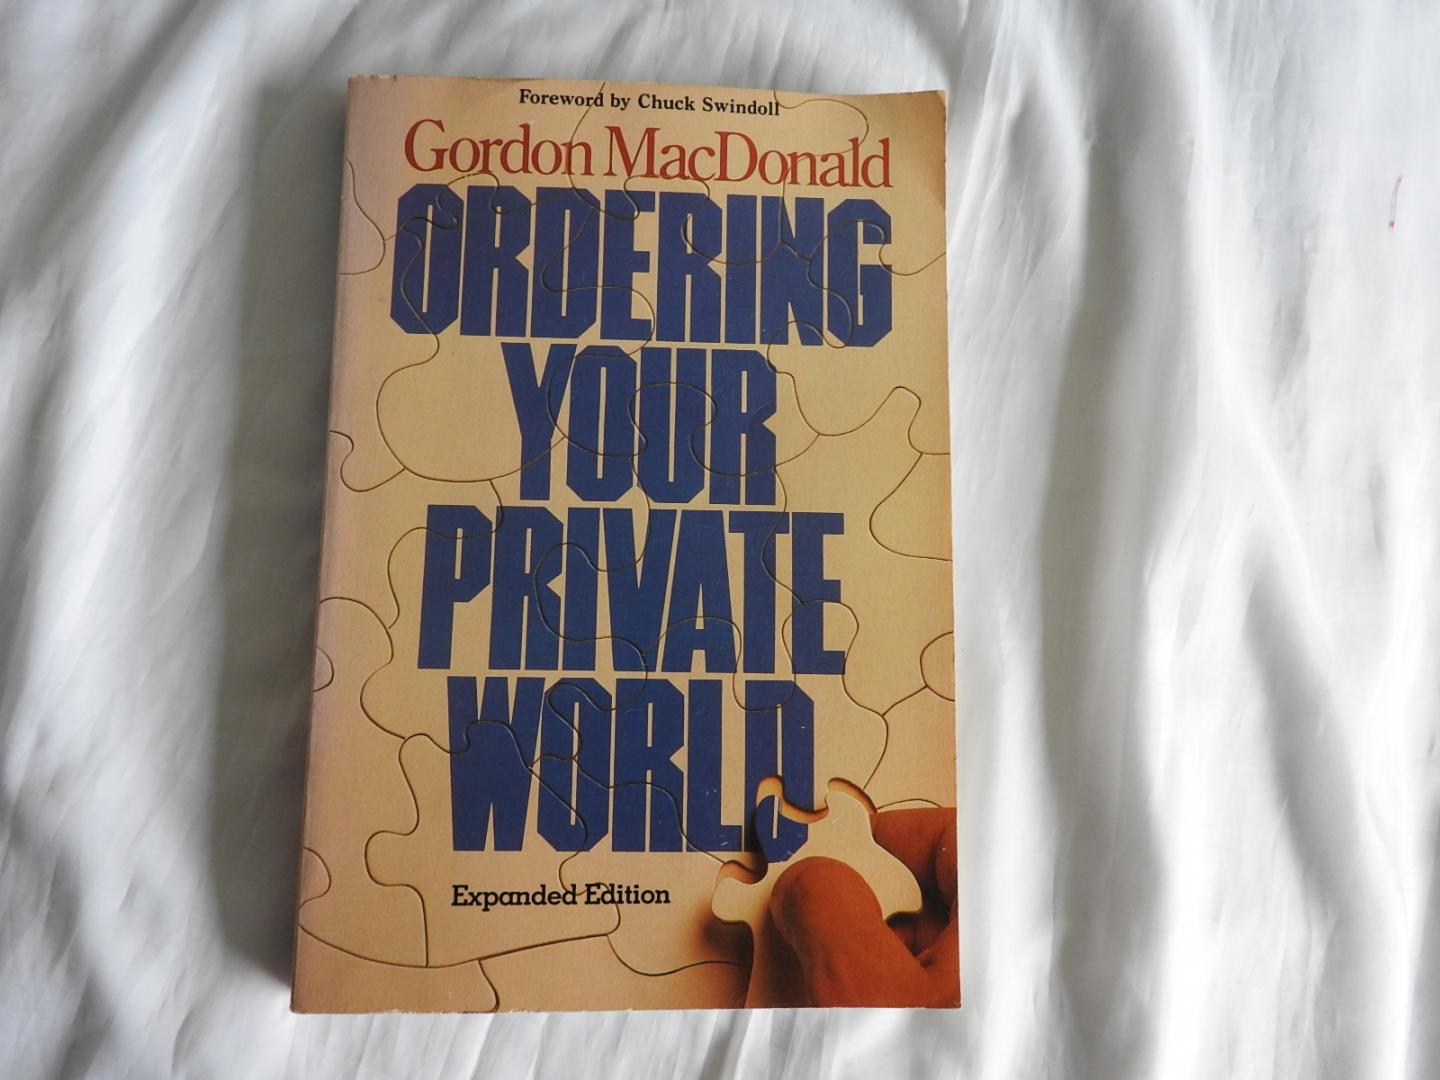 Macdonald, Gordon - Ordering Your Private World - expanded edition.